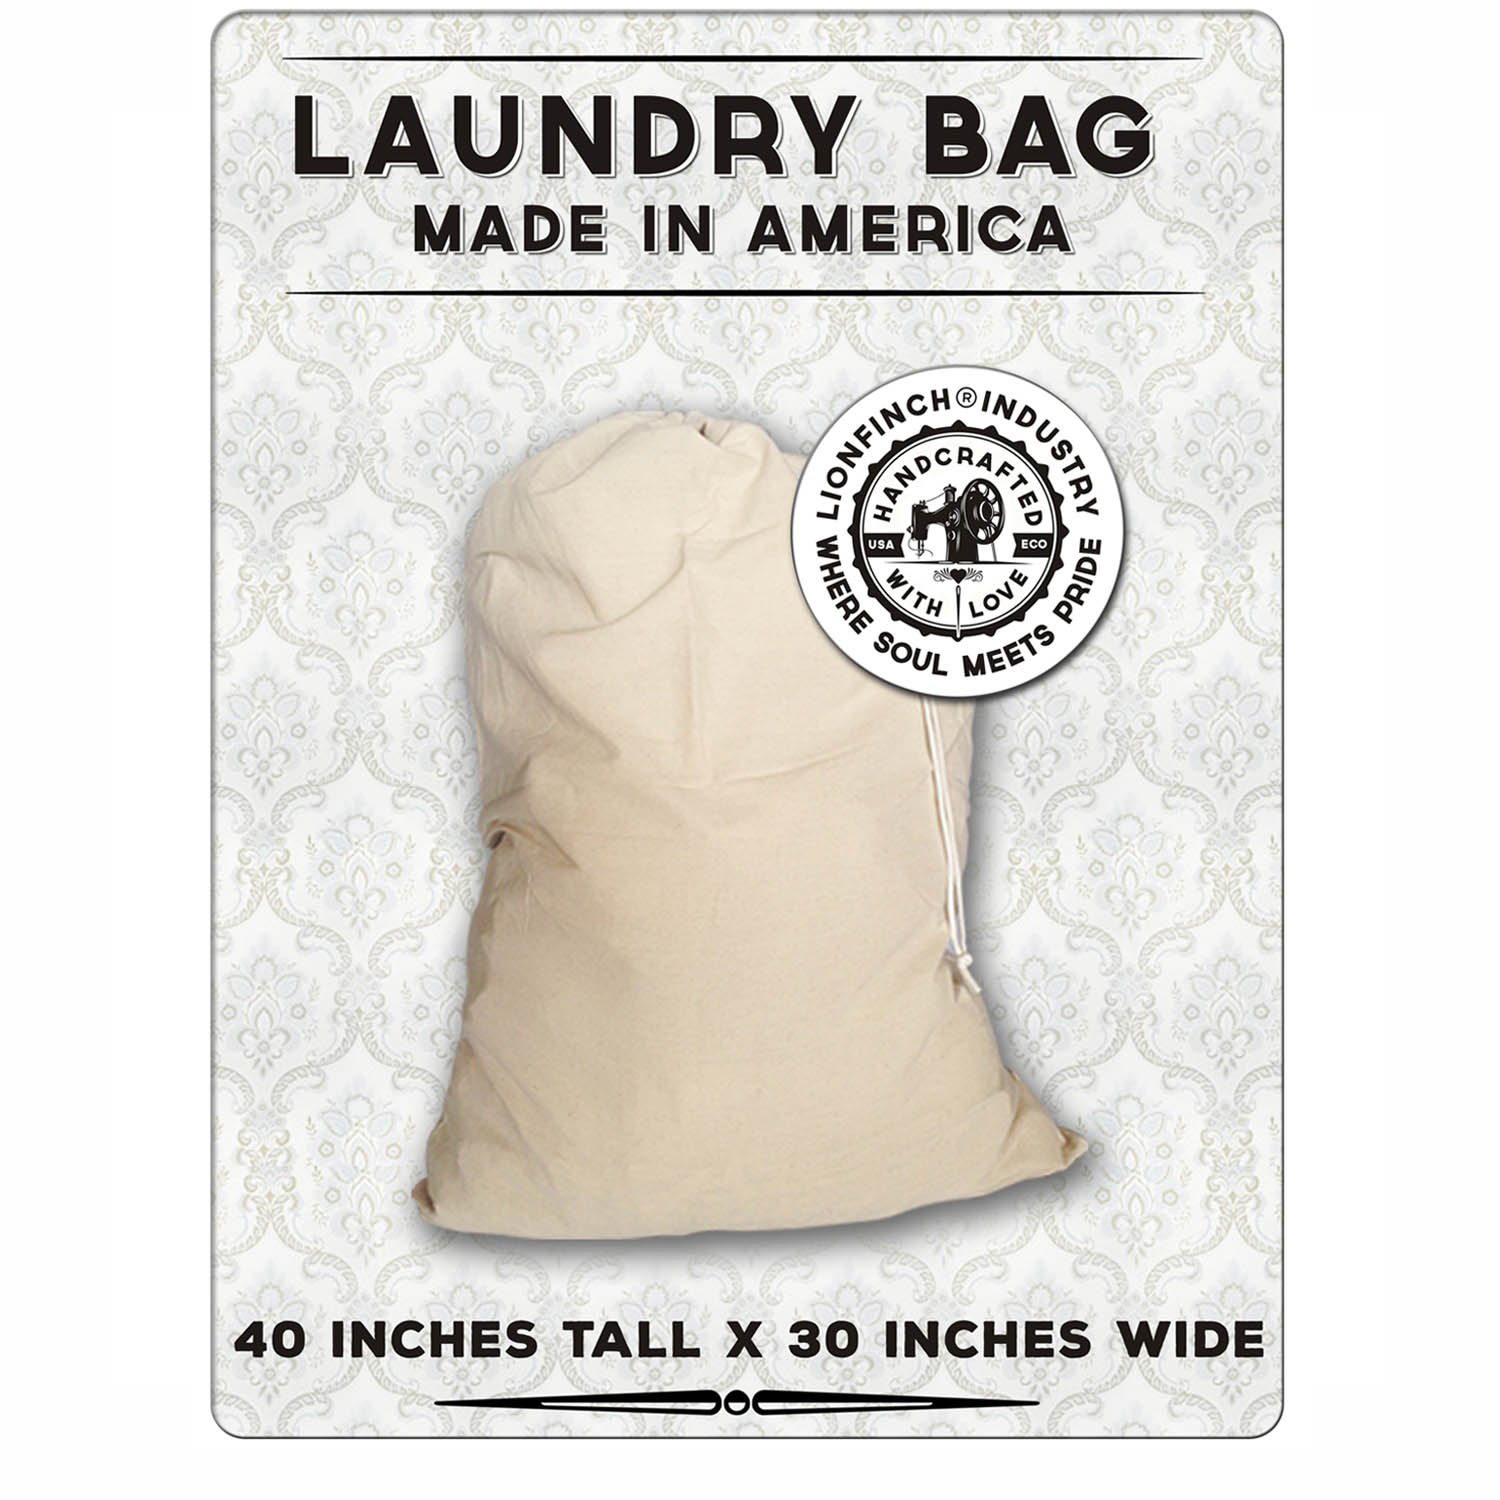 Laundry Bag Made in America. Heavy Duty and Oversized. Holds up to 150  Pounds of Laundry and Bedding. Fits All Hampers. Proudly Made in Cali! —  LIONFINCH- Specializing in Mattress Protection, Bed